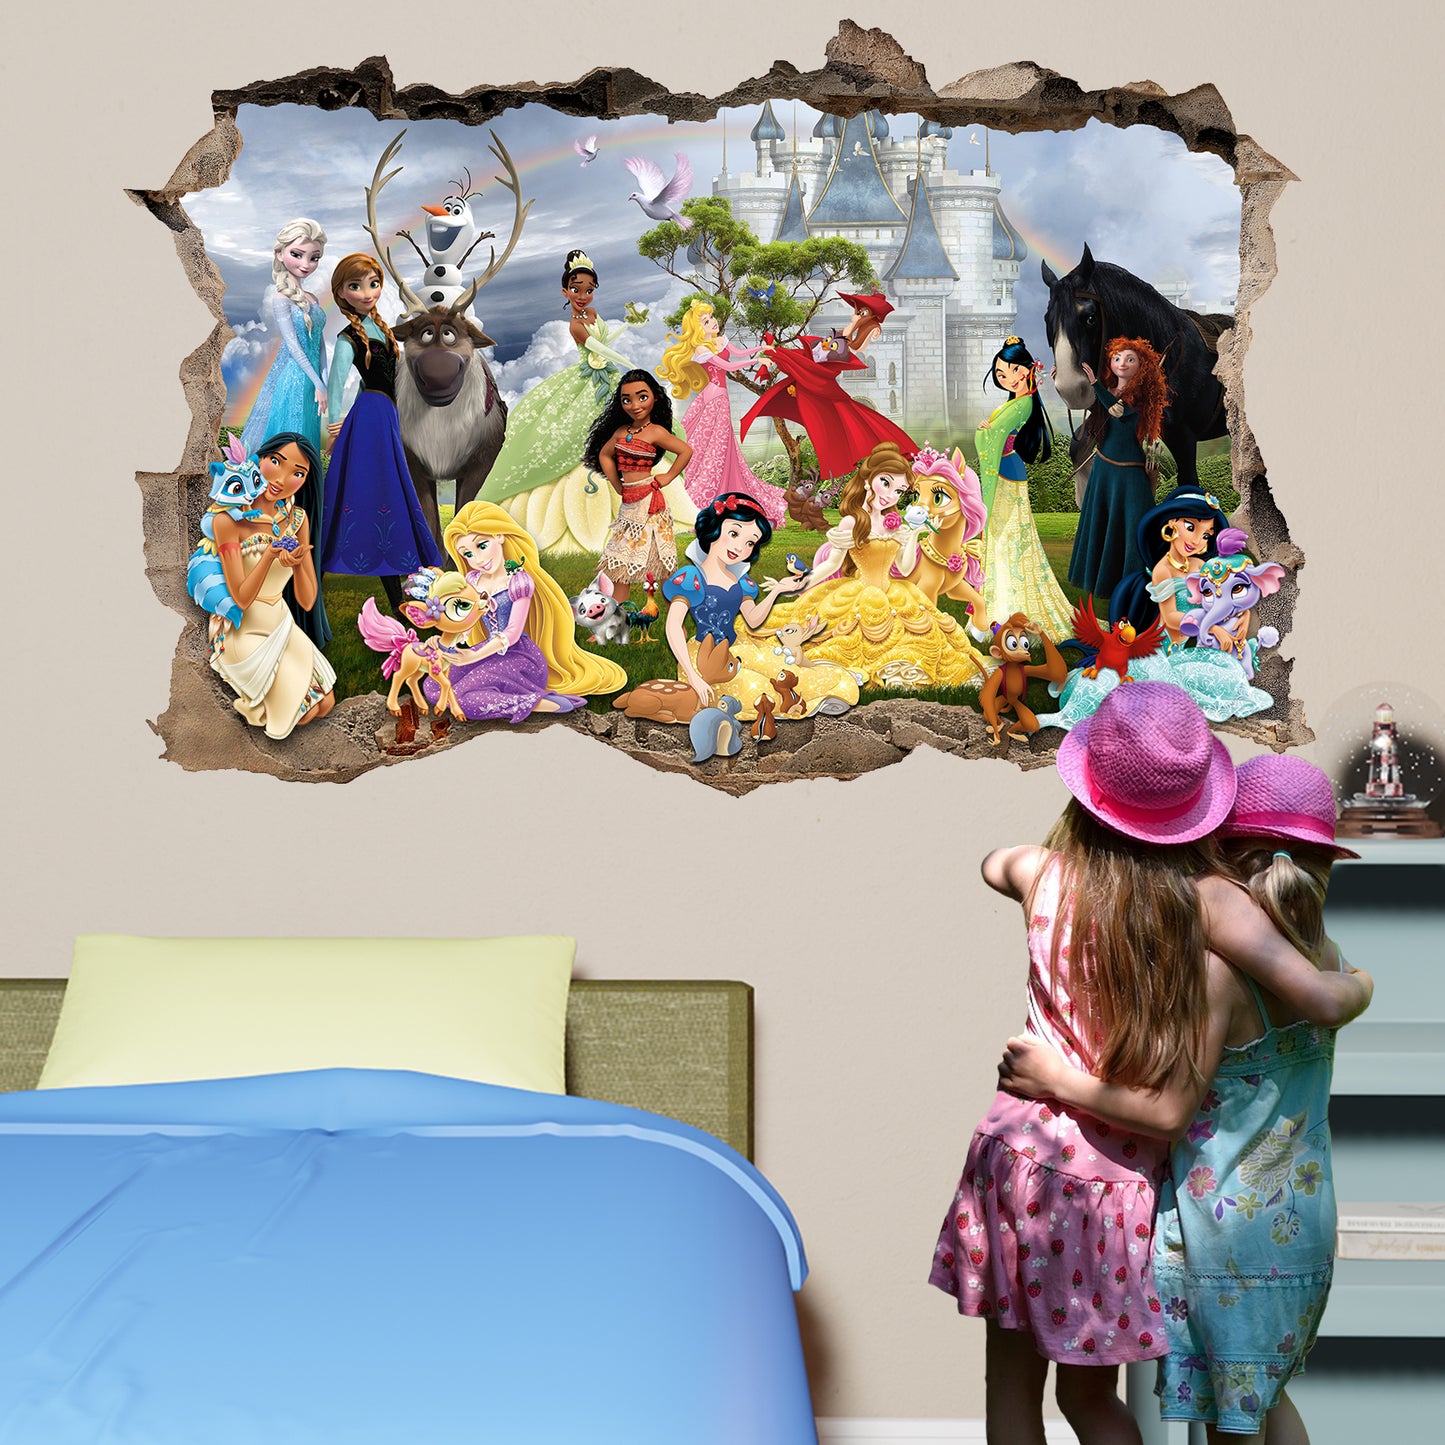 Disney Castle Princess Characters and Pets Wall Sticker Art Poster Decal Mural  Nursery Girls Room Decor 1083